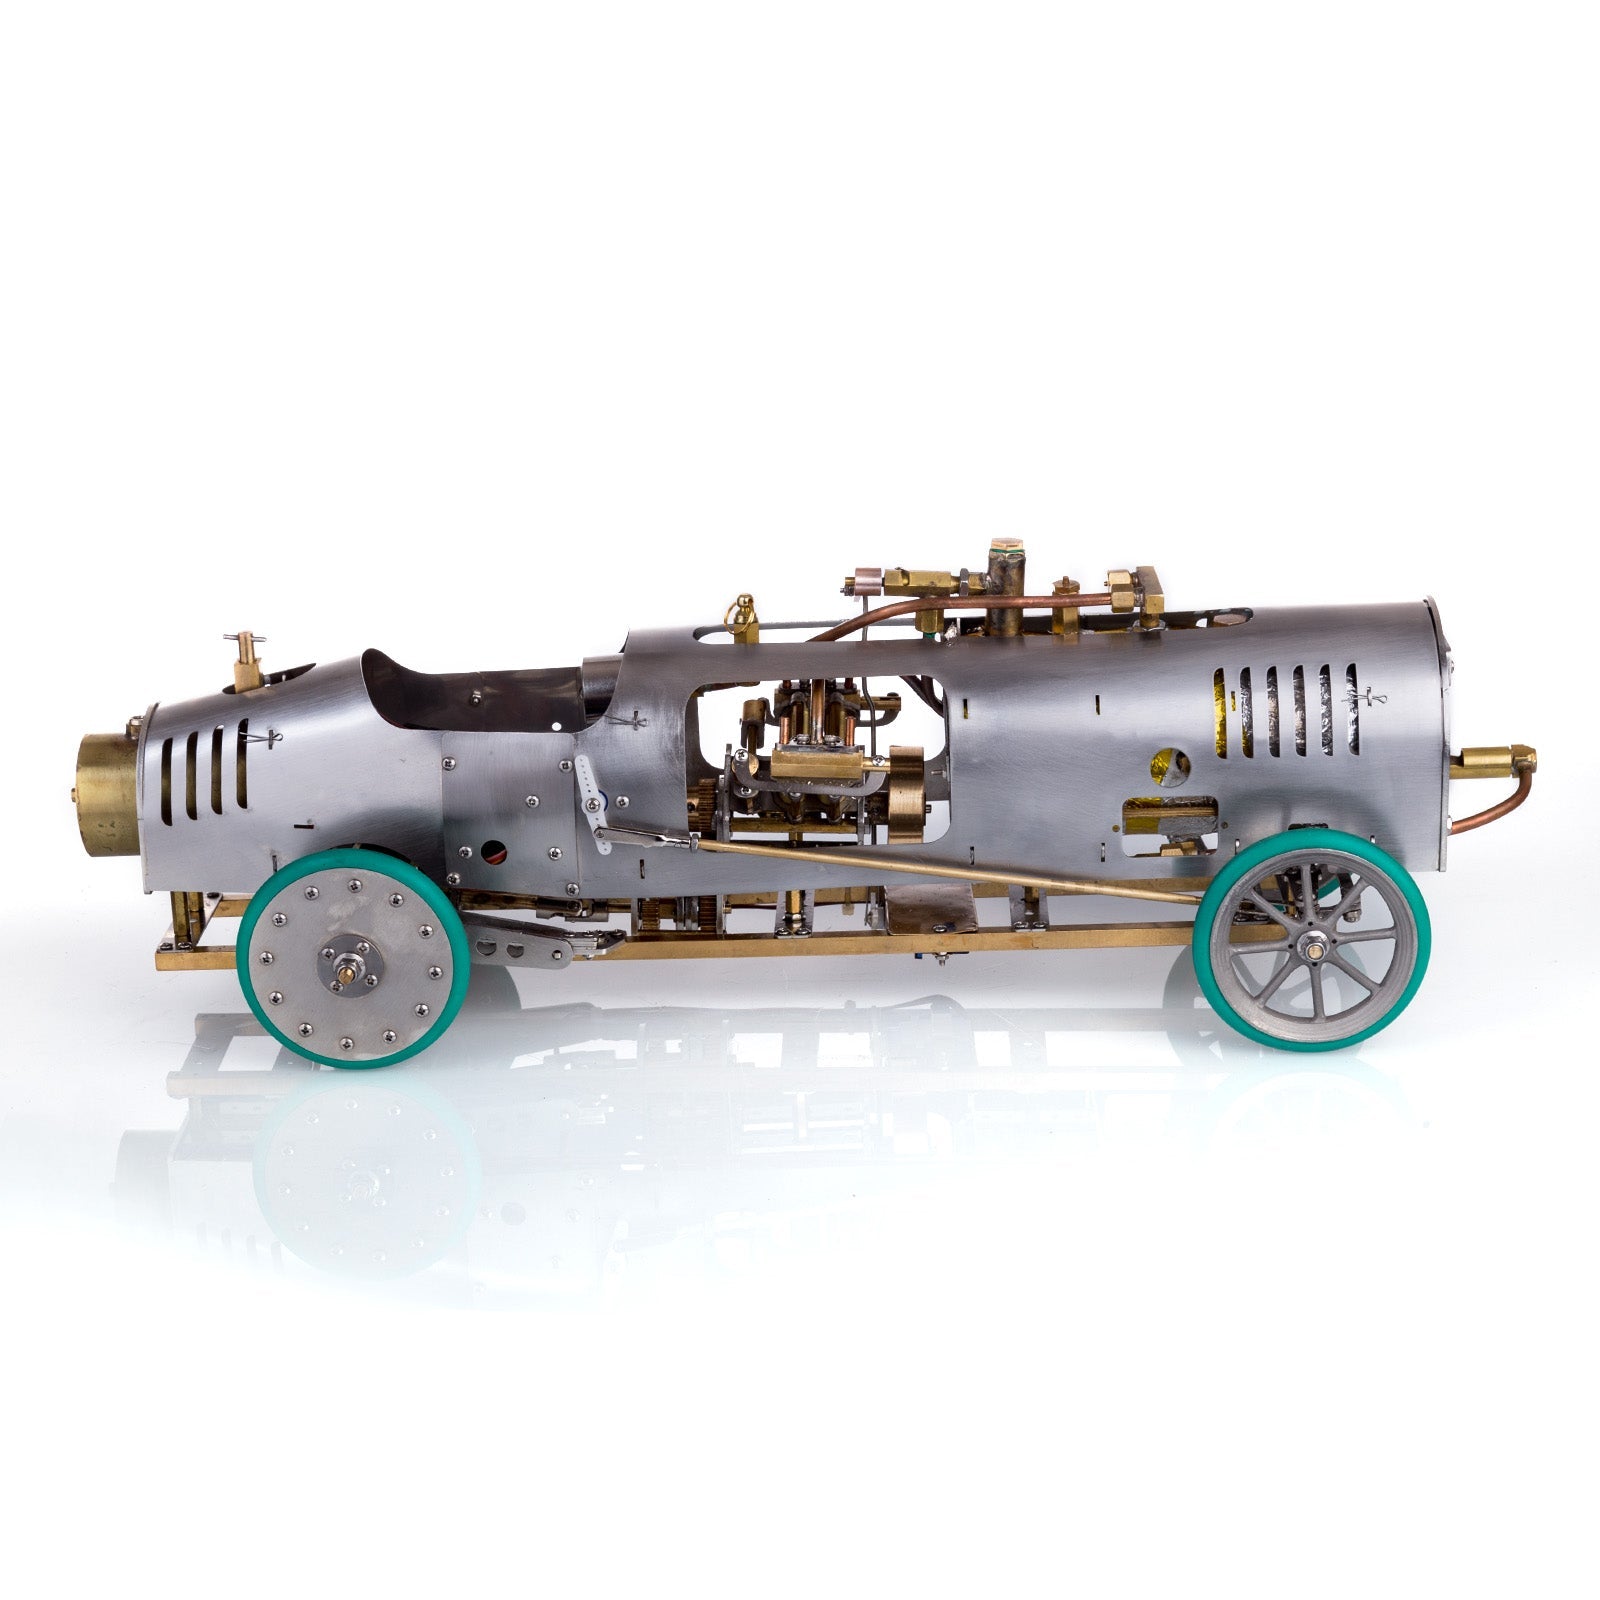 RC Rear-drive Steam Car Retro Vehicle Model with V4 Steam Engine, Gearbox and Boiler - 1/10 Scale enginediyshop